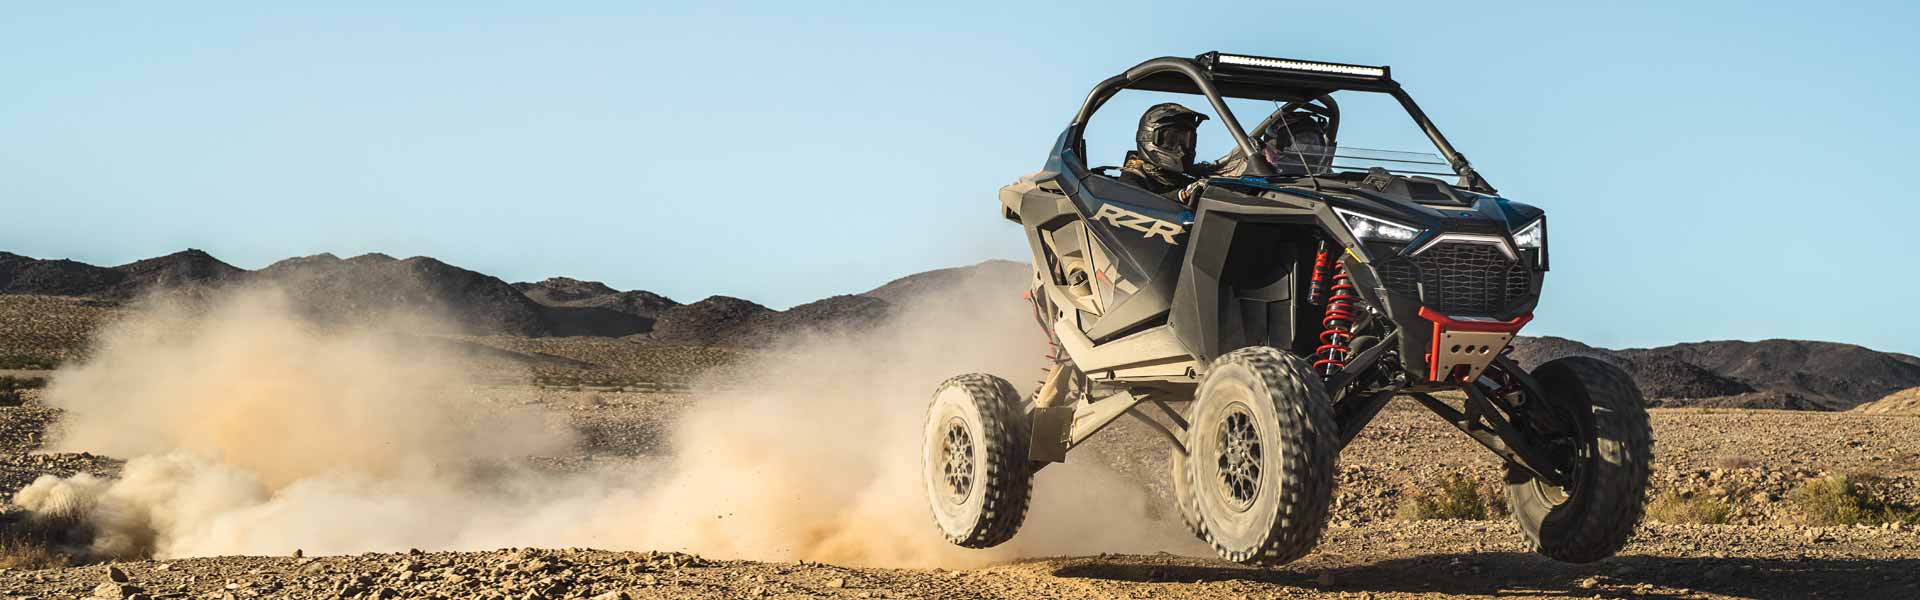 RZR PRO R ULTIMATE EPS Image